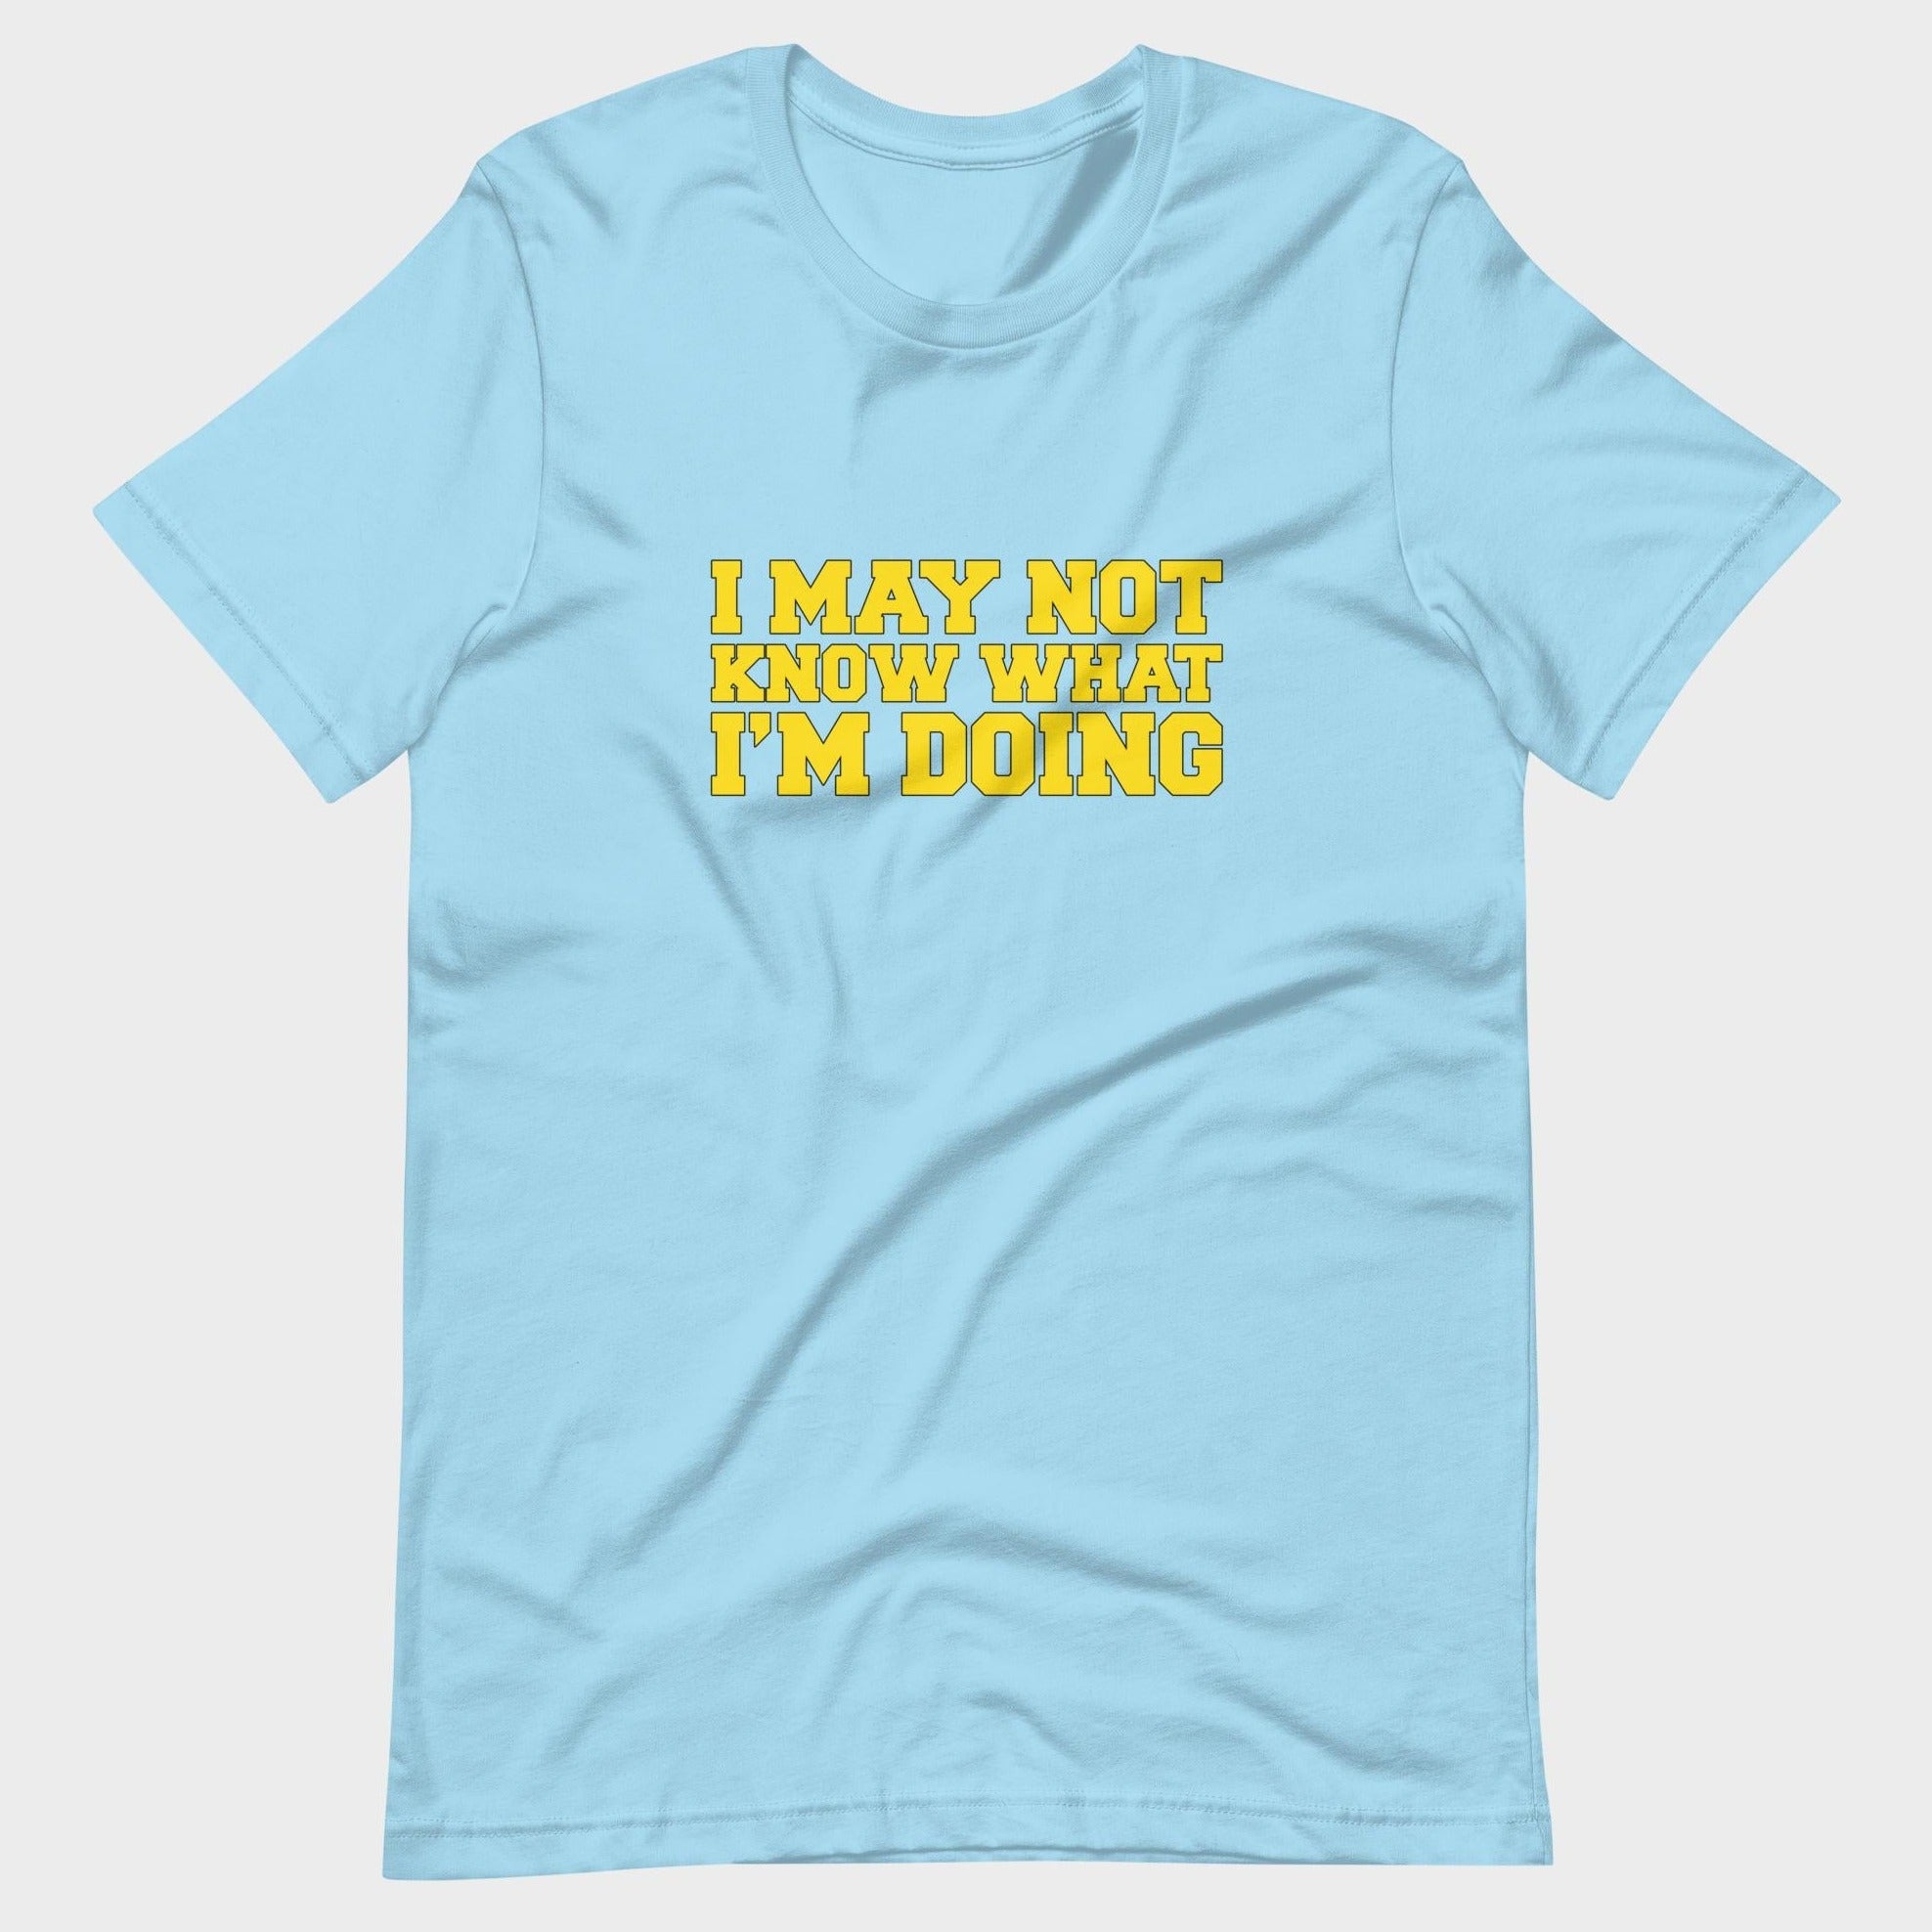 I May Not Know What I'm Doing - T-Shirt